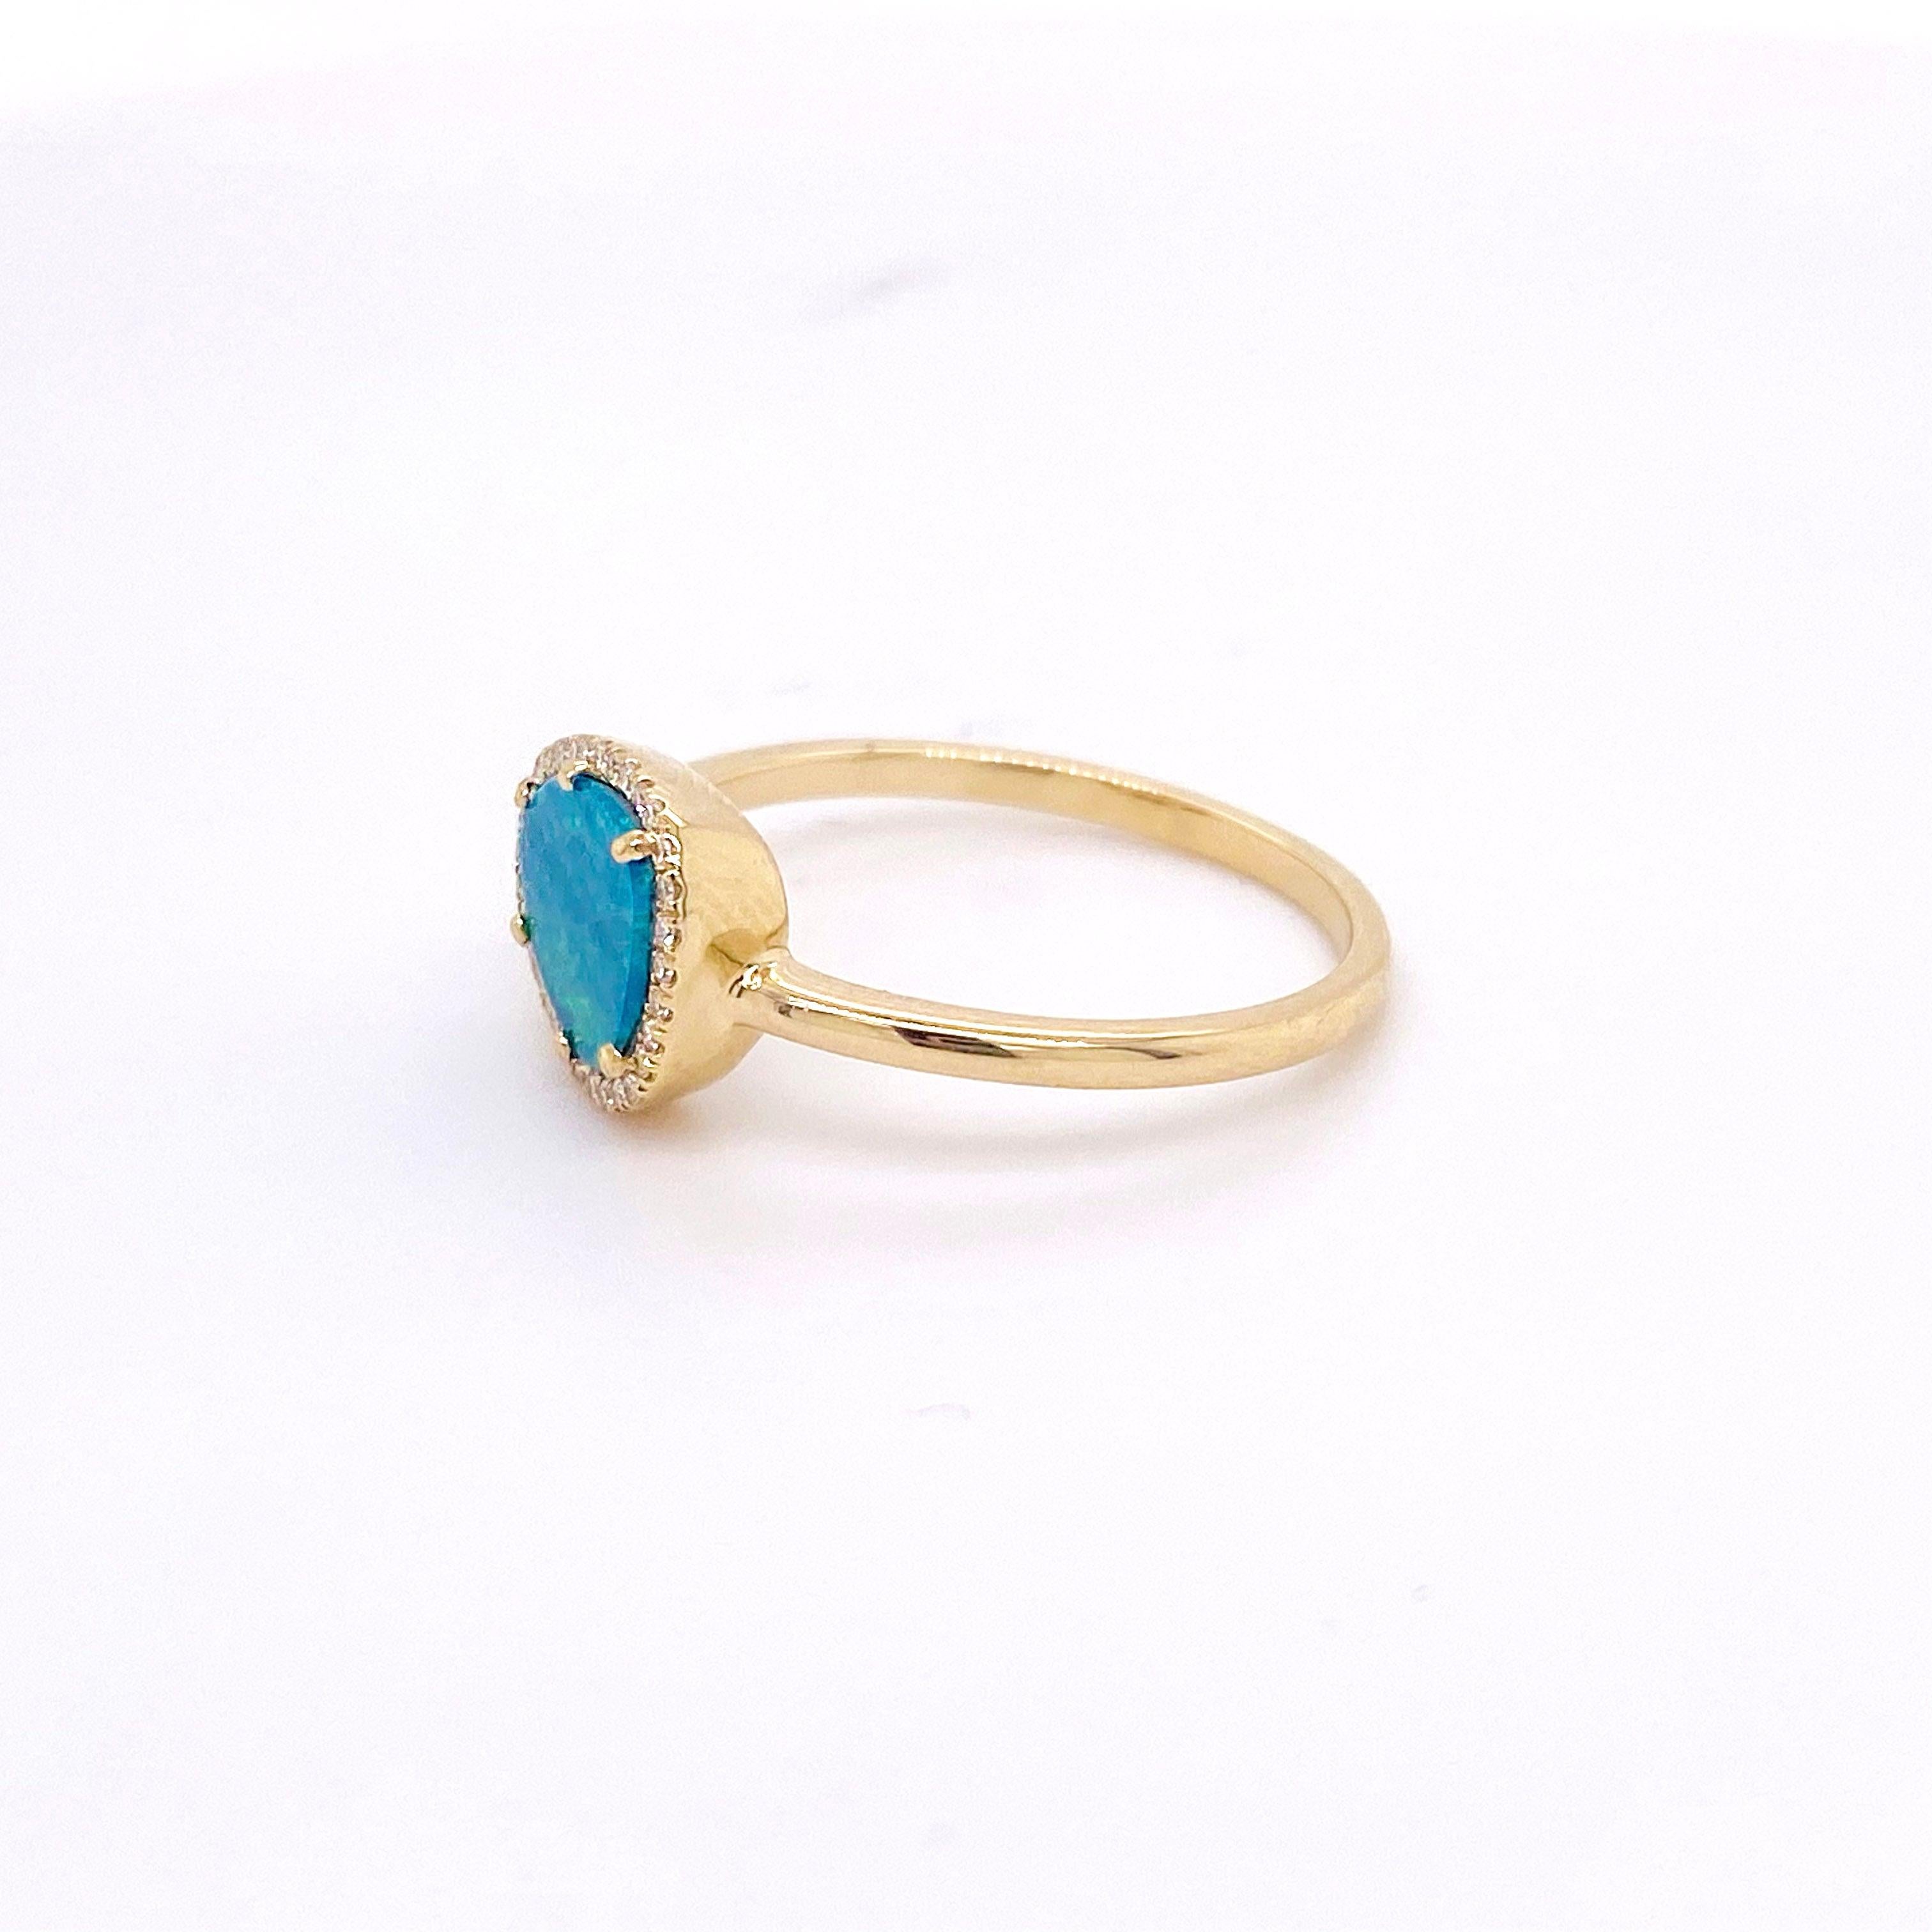 For Sale:  Opal and Diamond Halo Ring, Yellow Gold, Organic Shape Opal .88 Carat 3